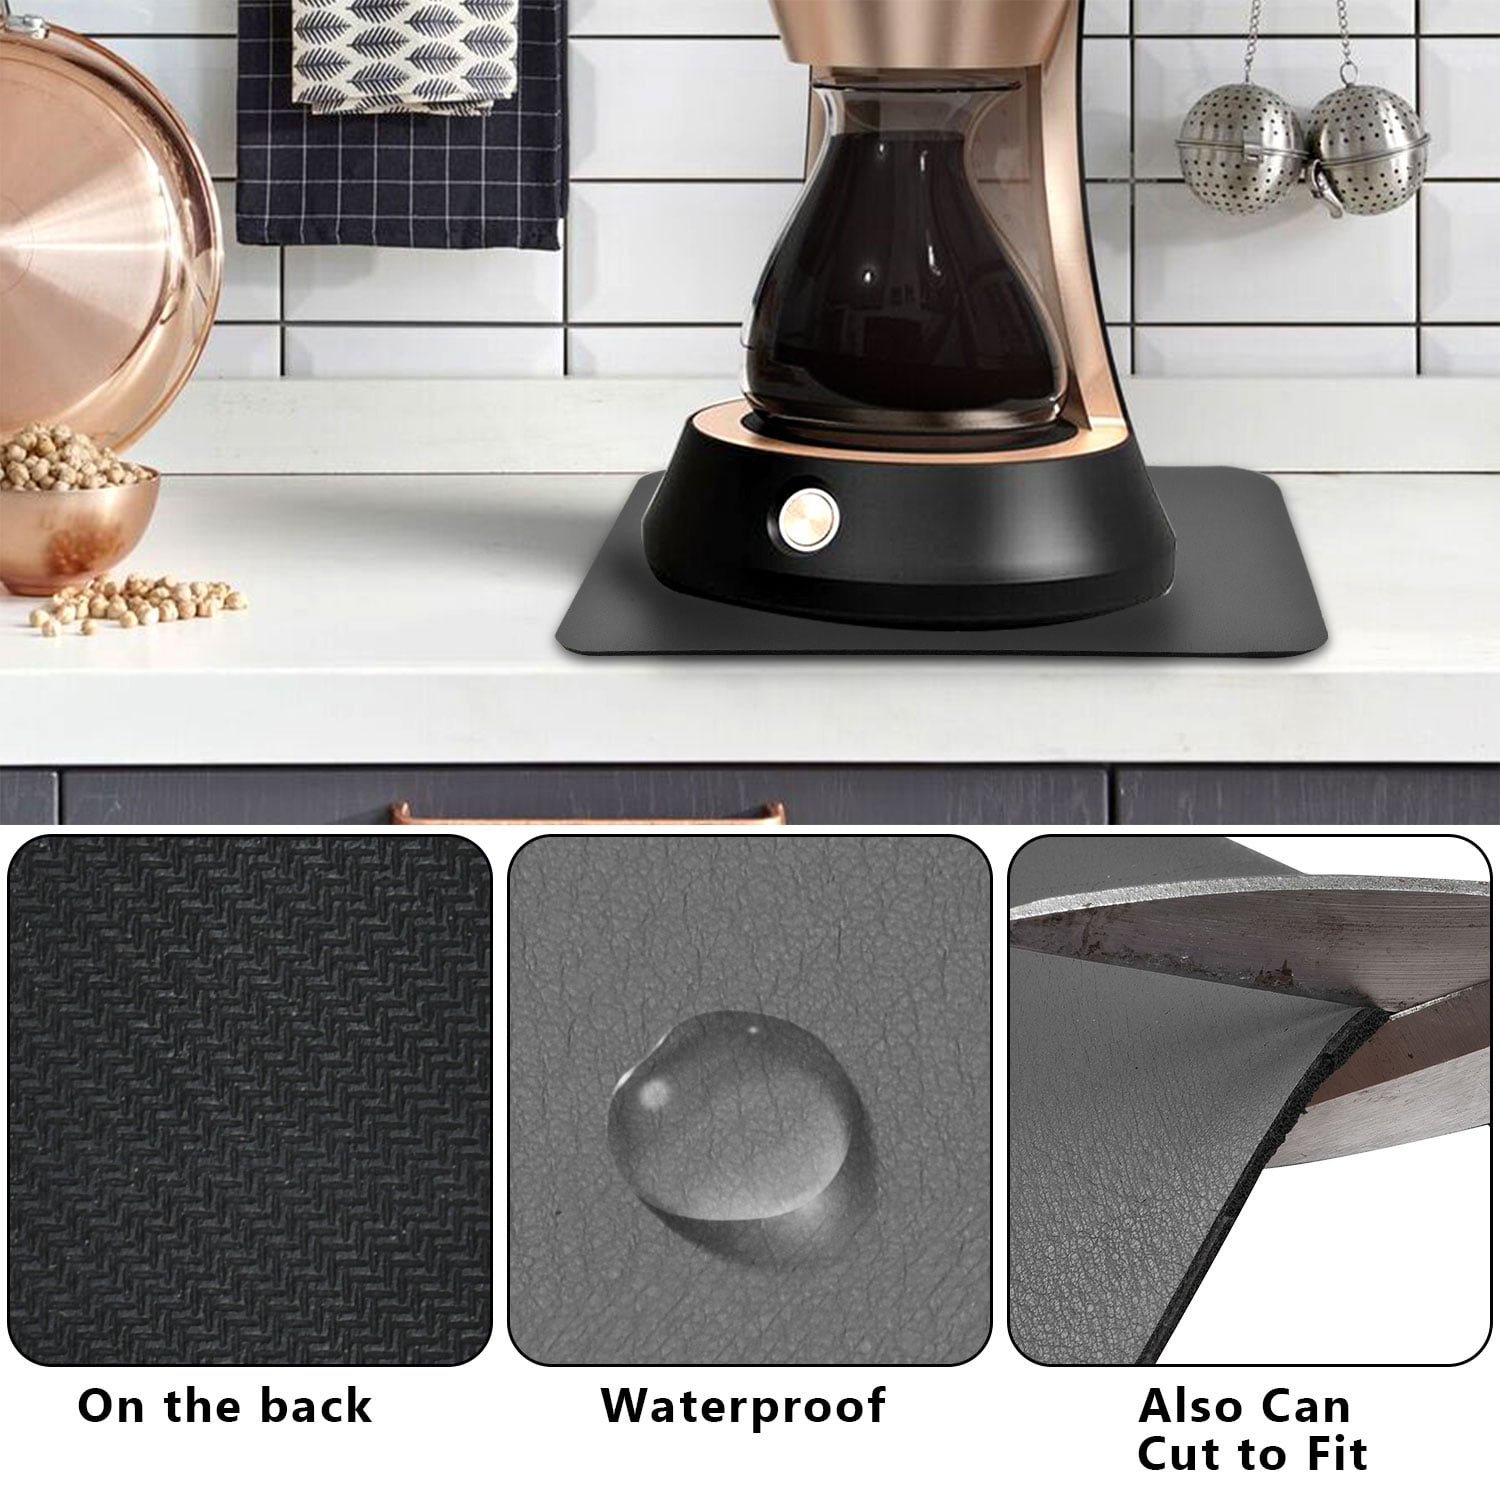 Coffee Mat 20x16 Inch Super Absorbent Quick Dry Dish Drying Mat for Coffee  Bar Accessories,Coffee Maker,Coffee Grinder，Coffee Table Decor,Kitchen